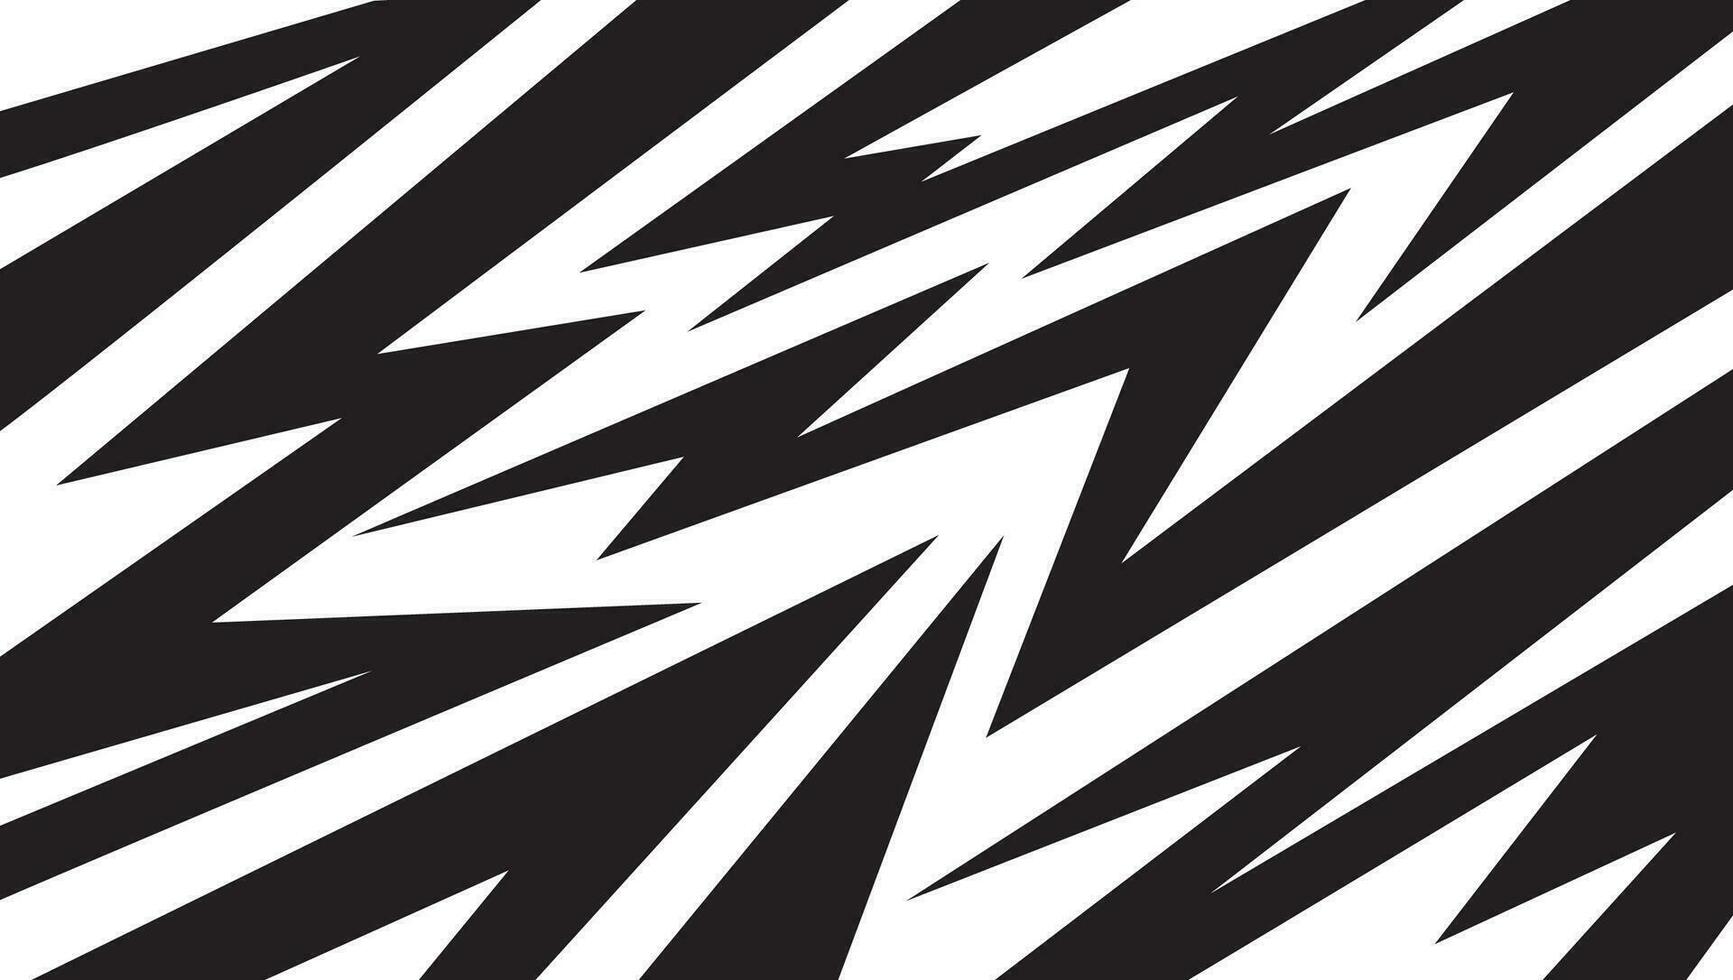 Monochromatic abstract backdrop with spiked elements and zigzag patterns. vector